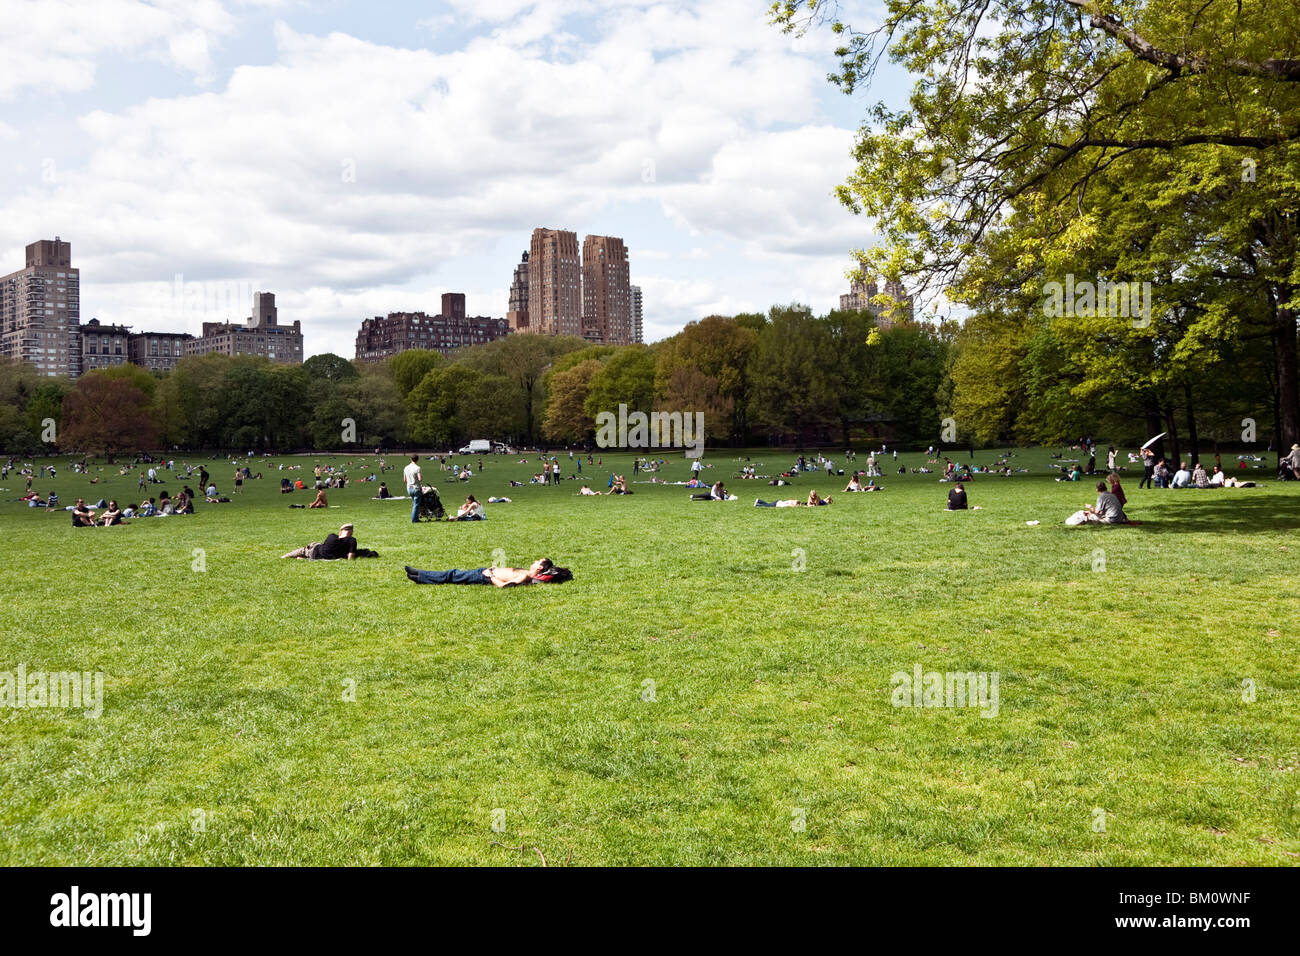 people seeking sun & nature dot the new grass of Central Park Sheeps ...